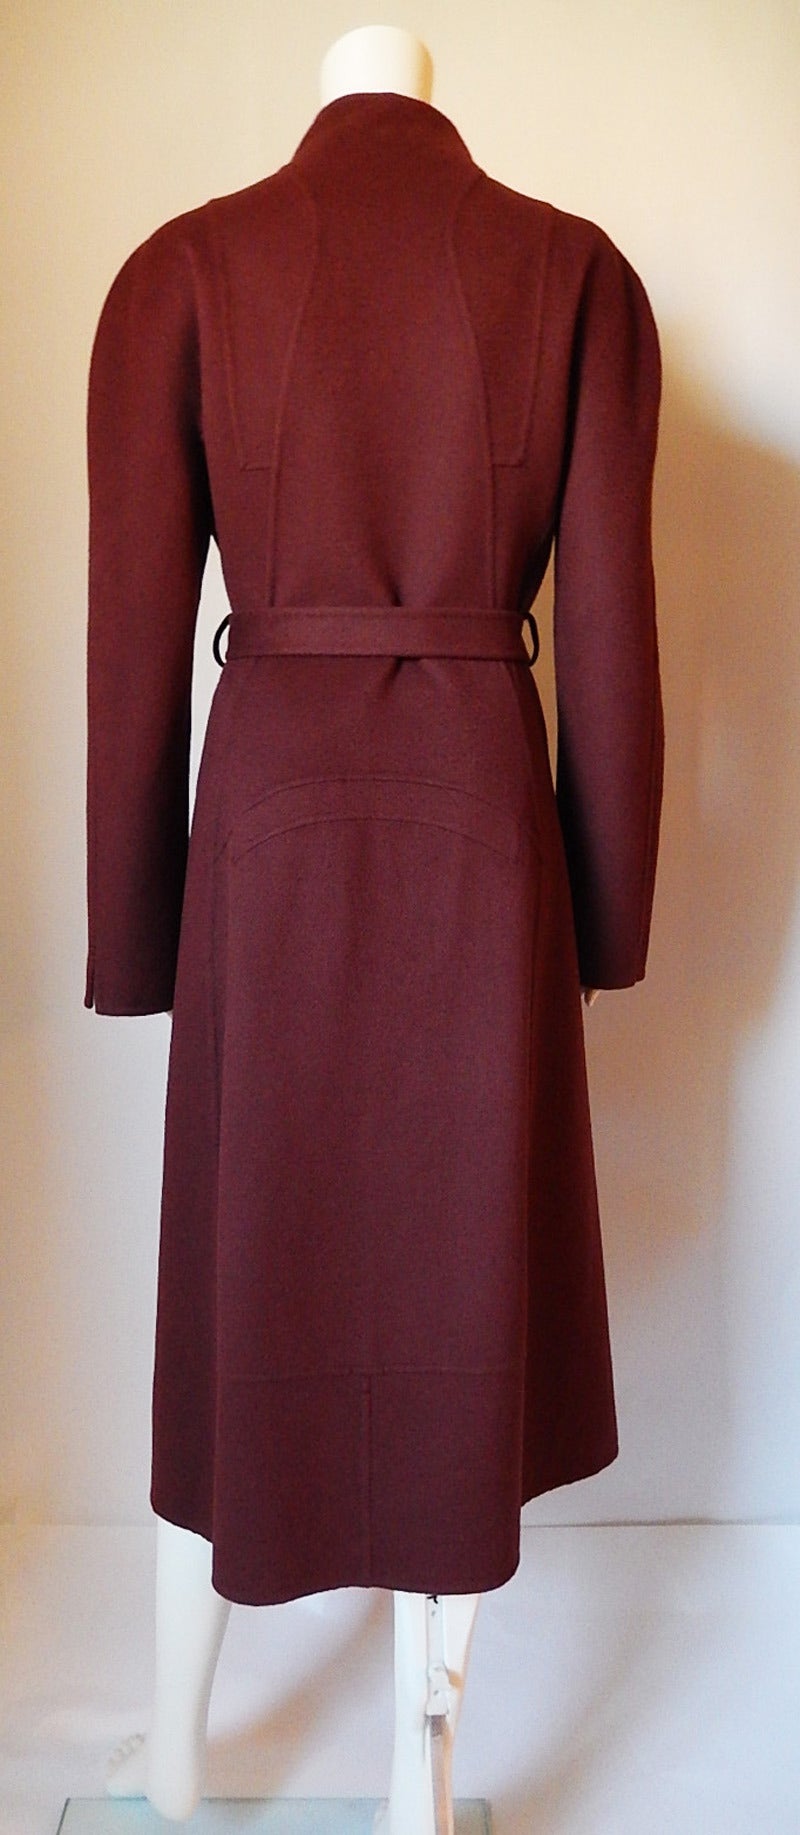 Chado Ralph Rucci 100% Double Faced Cashmere Coat in Maroon For Sale 2